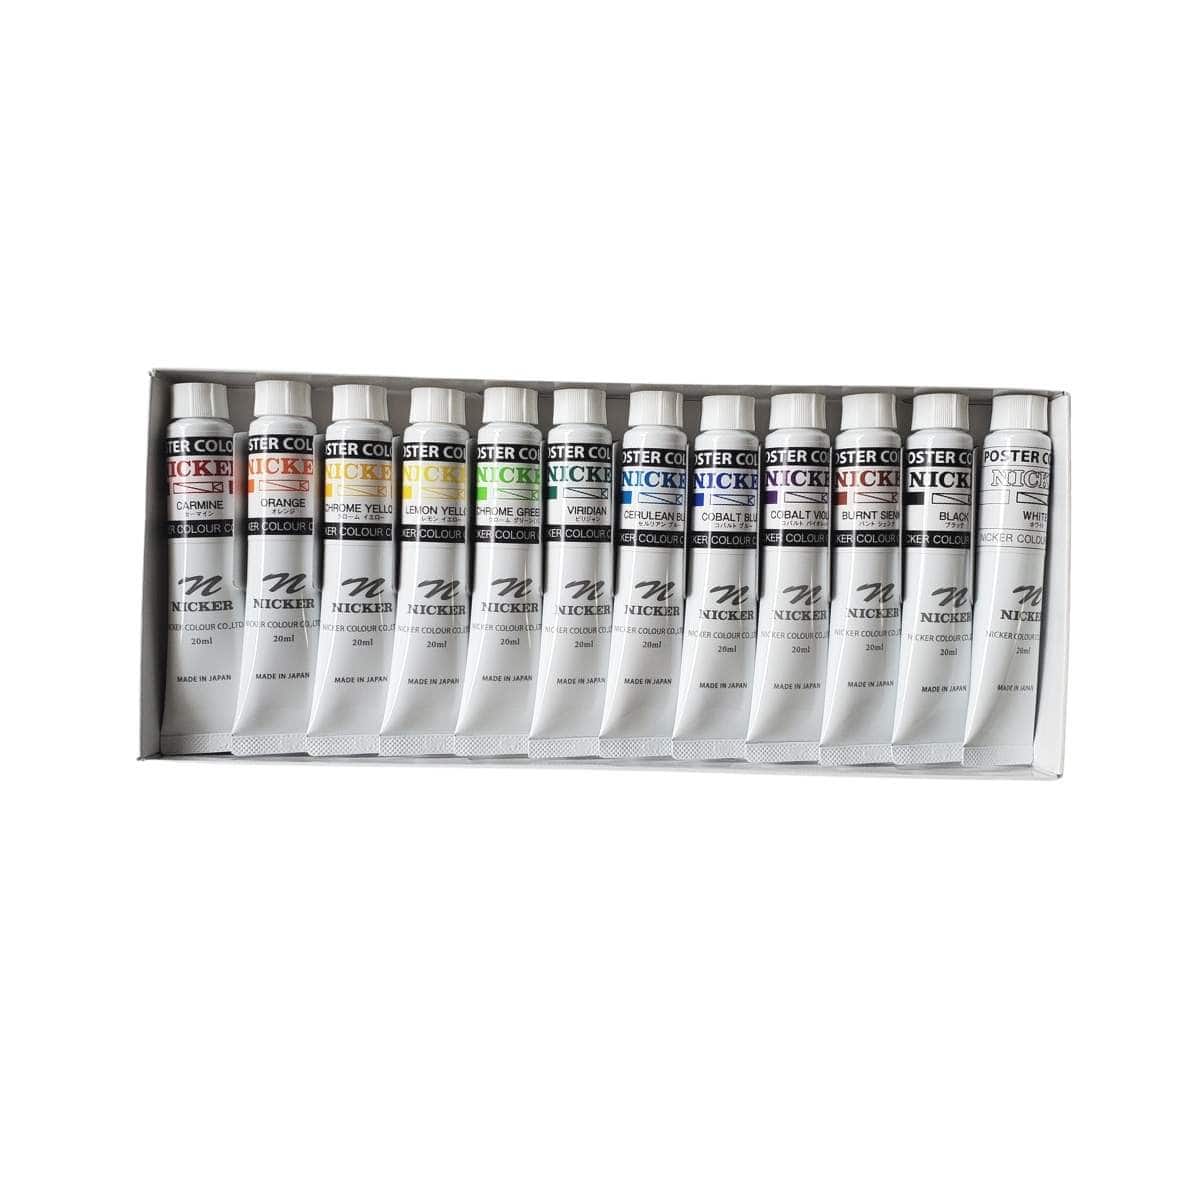 Buy NICKER POSTER COLOR40ml 18COLOR SET [SDS-NIC-0003] from Japan - Buy  authentic Plus exclusive items from Japan